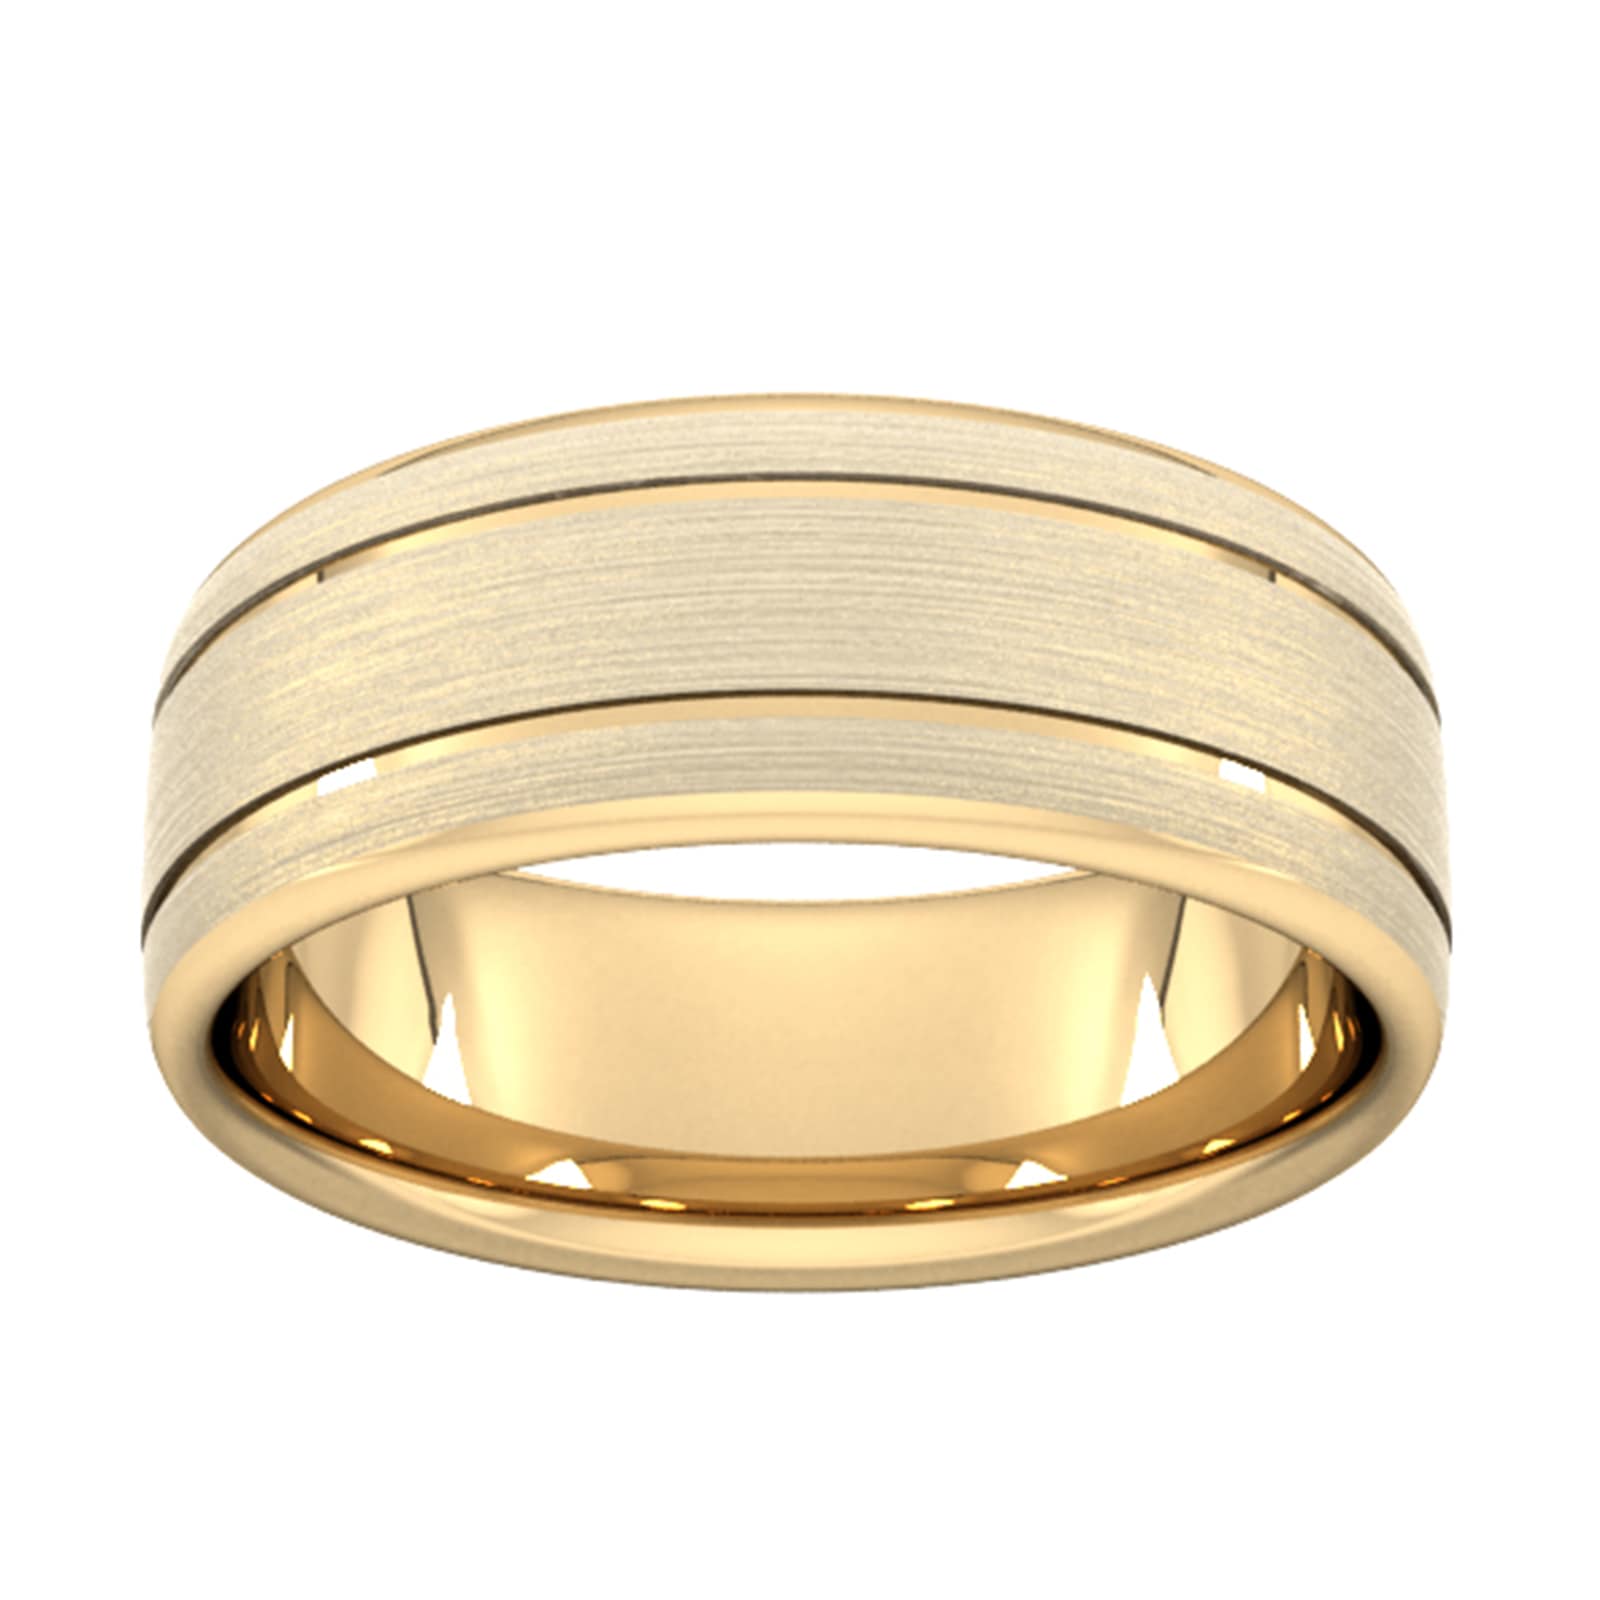 8mm slight court extra heavy matt finish with double grooves wedding ring in 9 carat yellow gold - ring size p